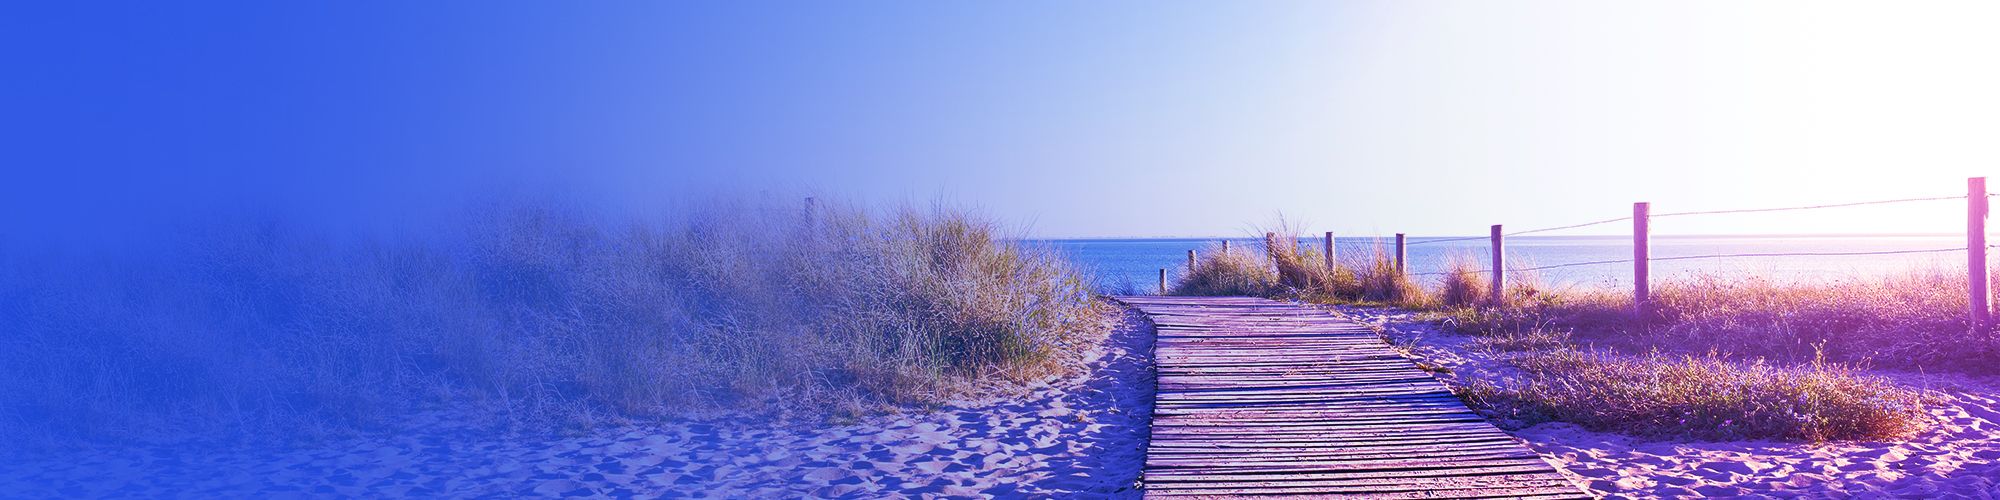 Wooden Path to the beach